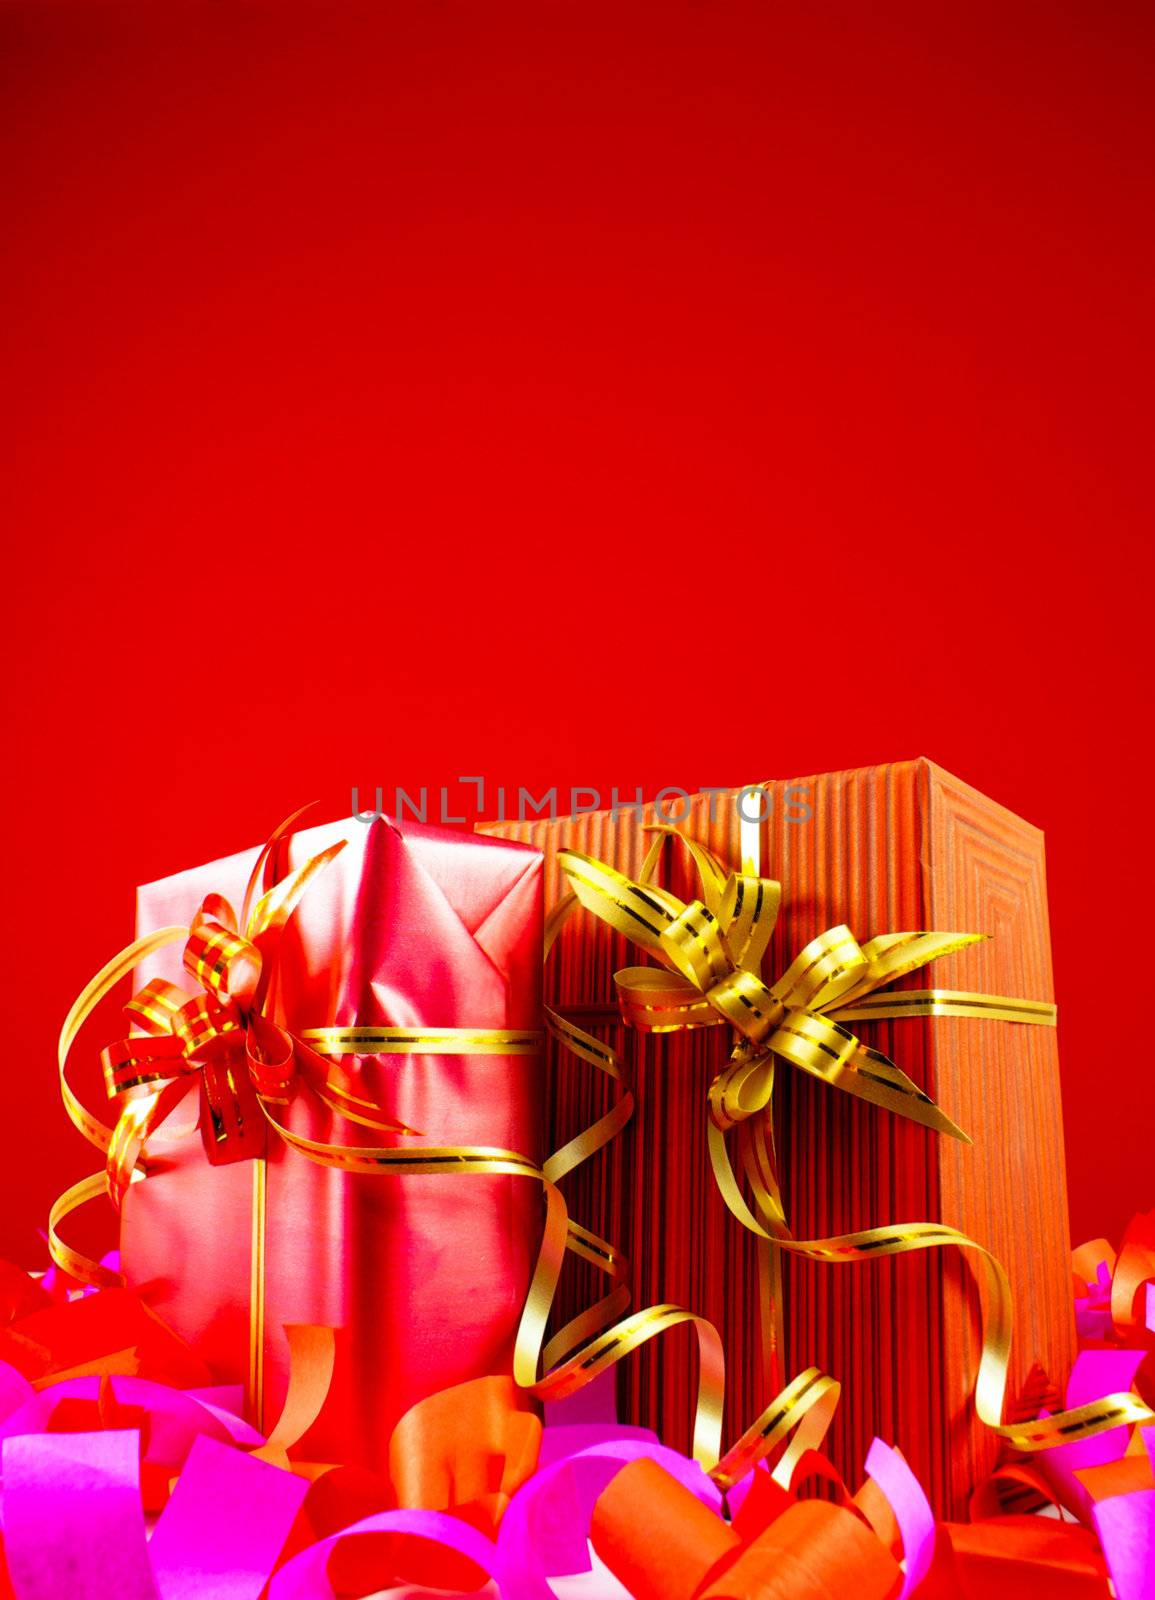 Presents in red boxes against red background